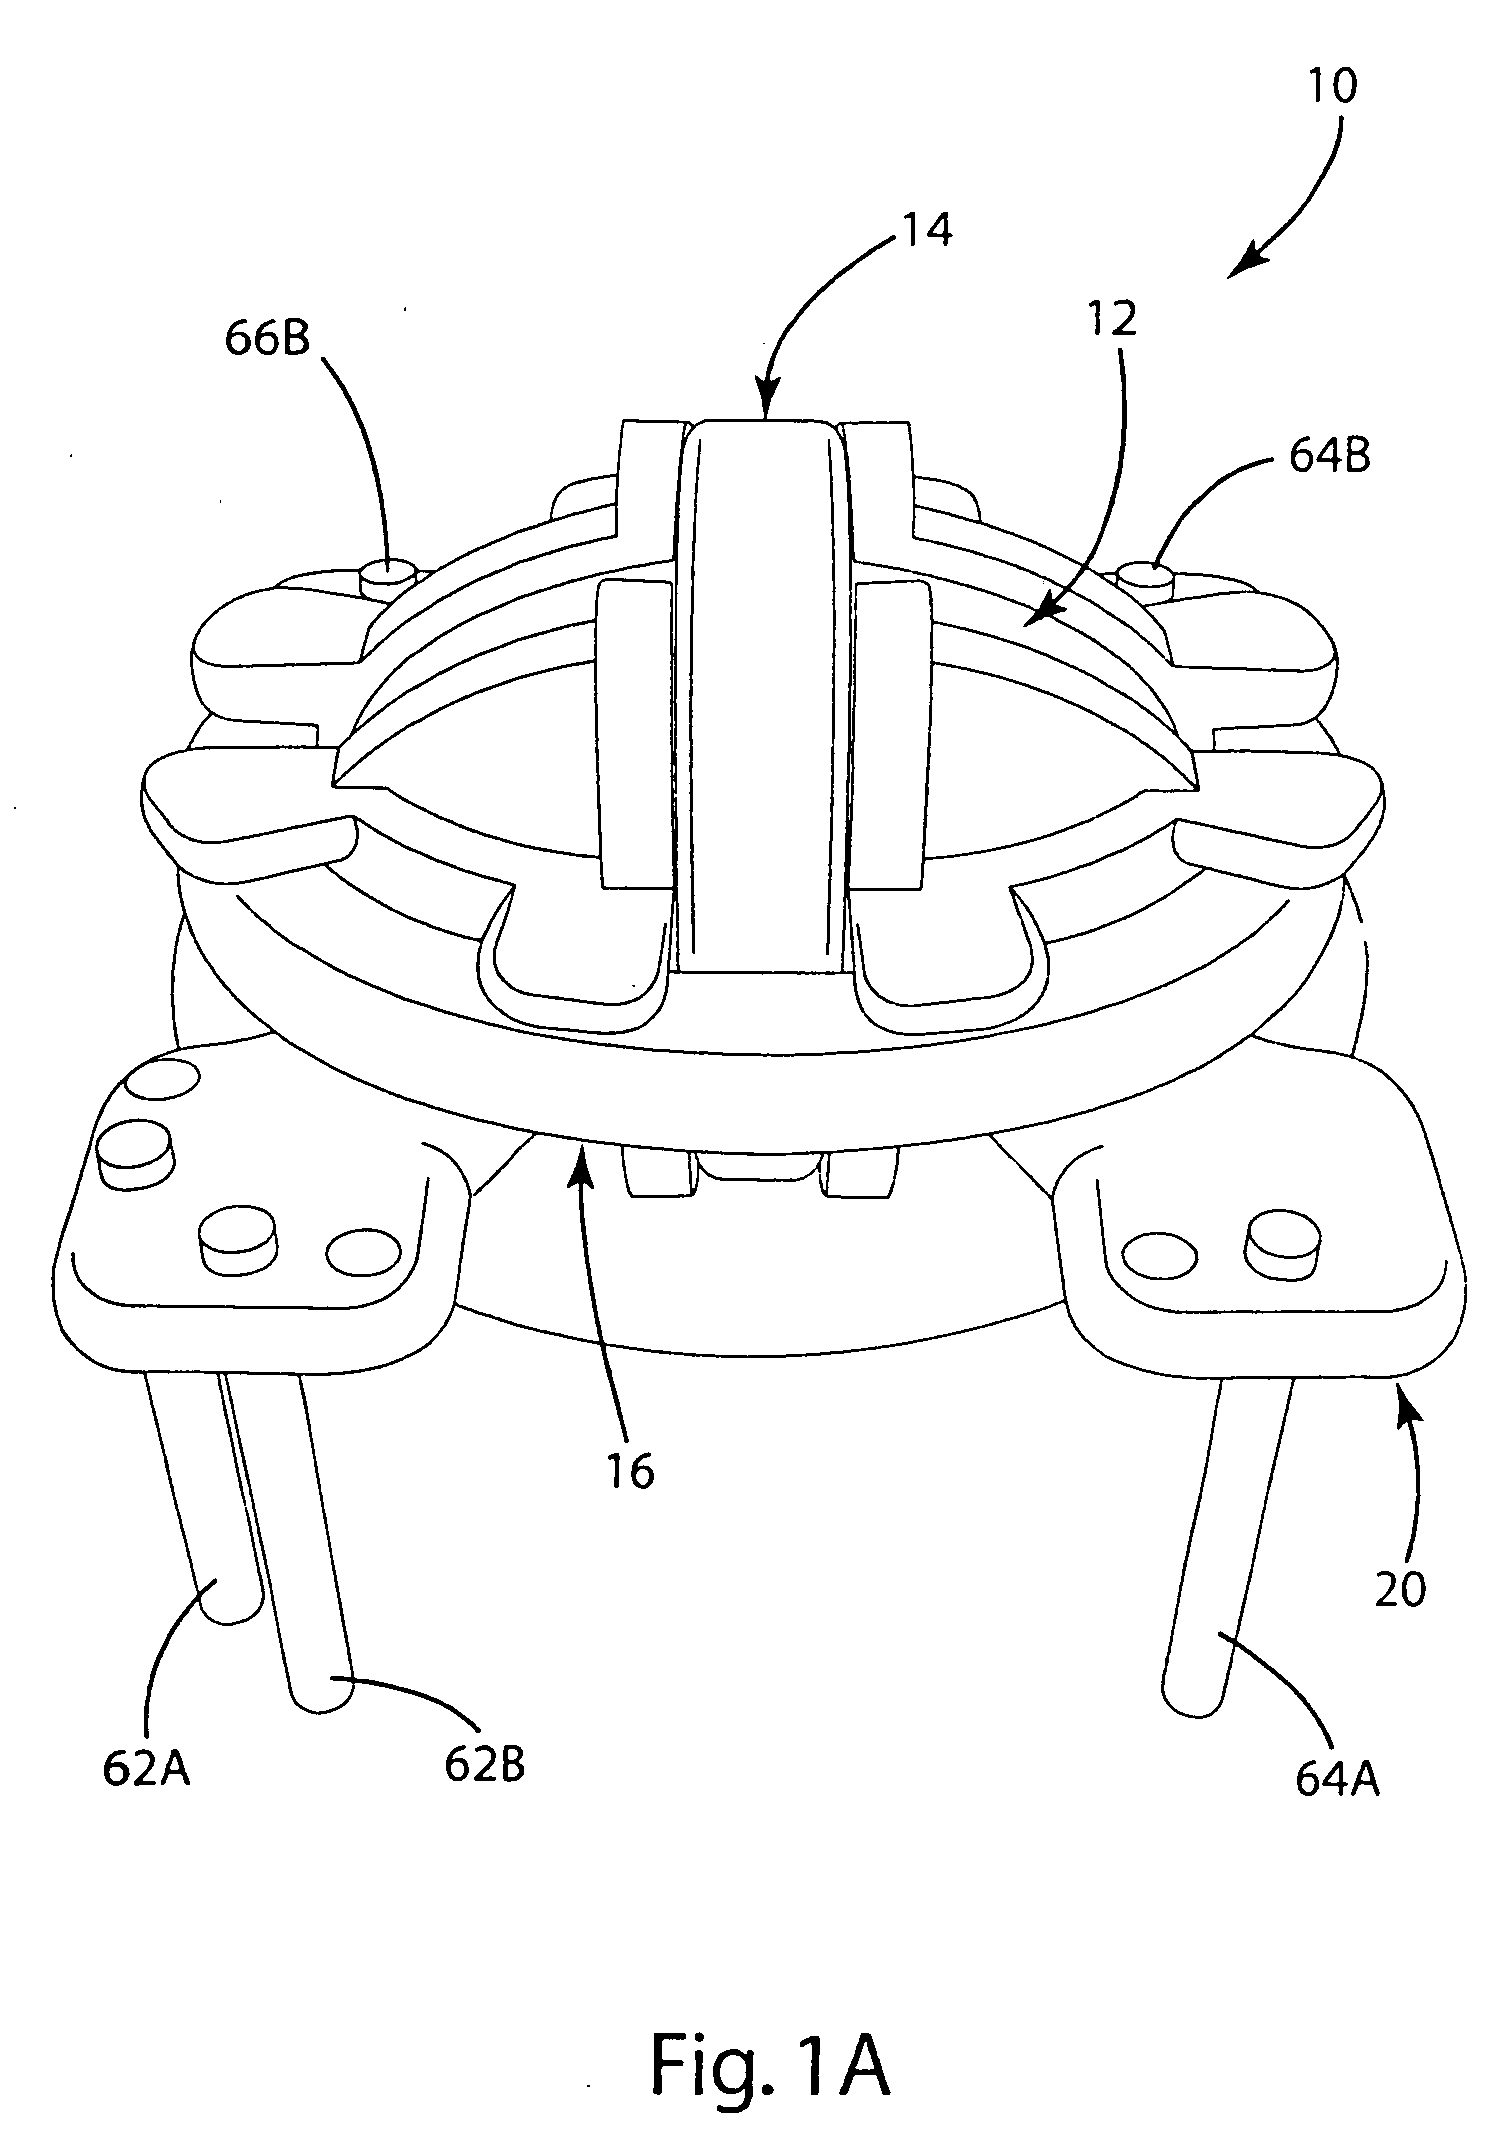 Inductive coil assembly